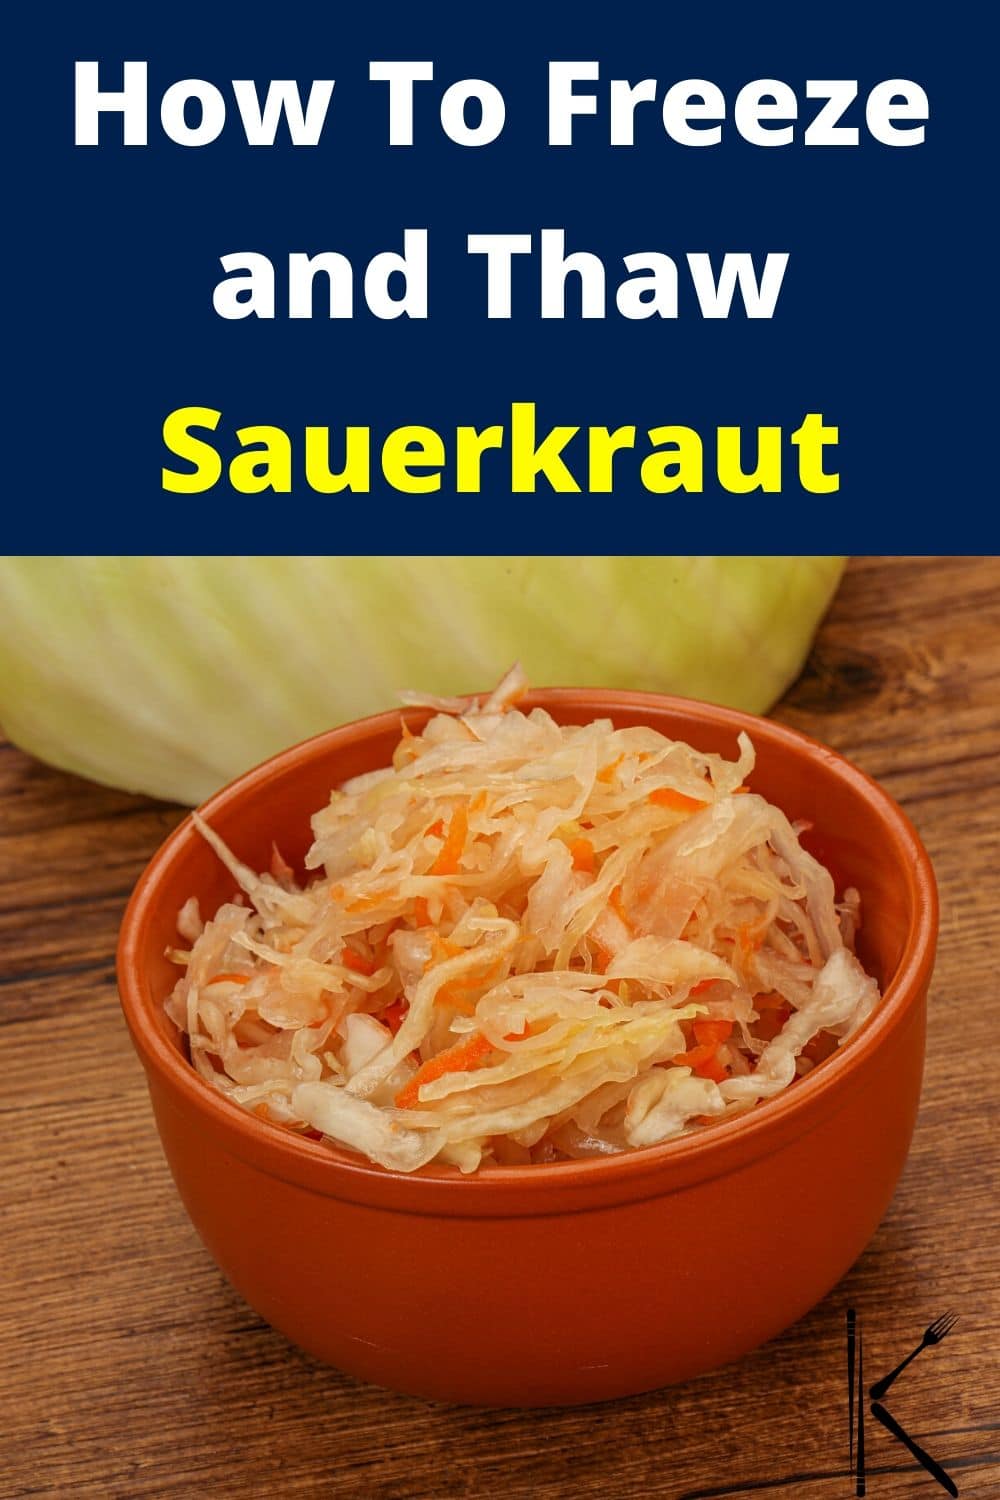 Can You Freeze Sauerkraut? Tips and Tricks for Defrosting - Kitchenous